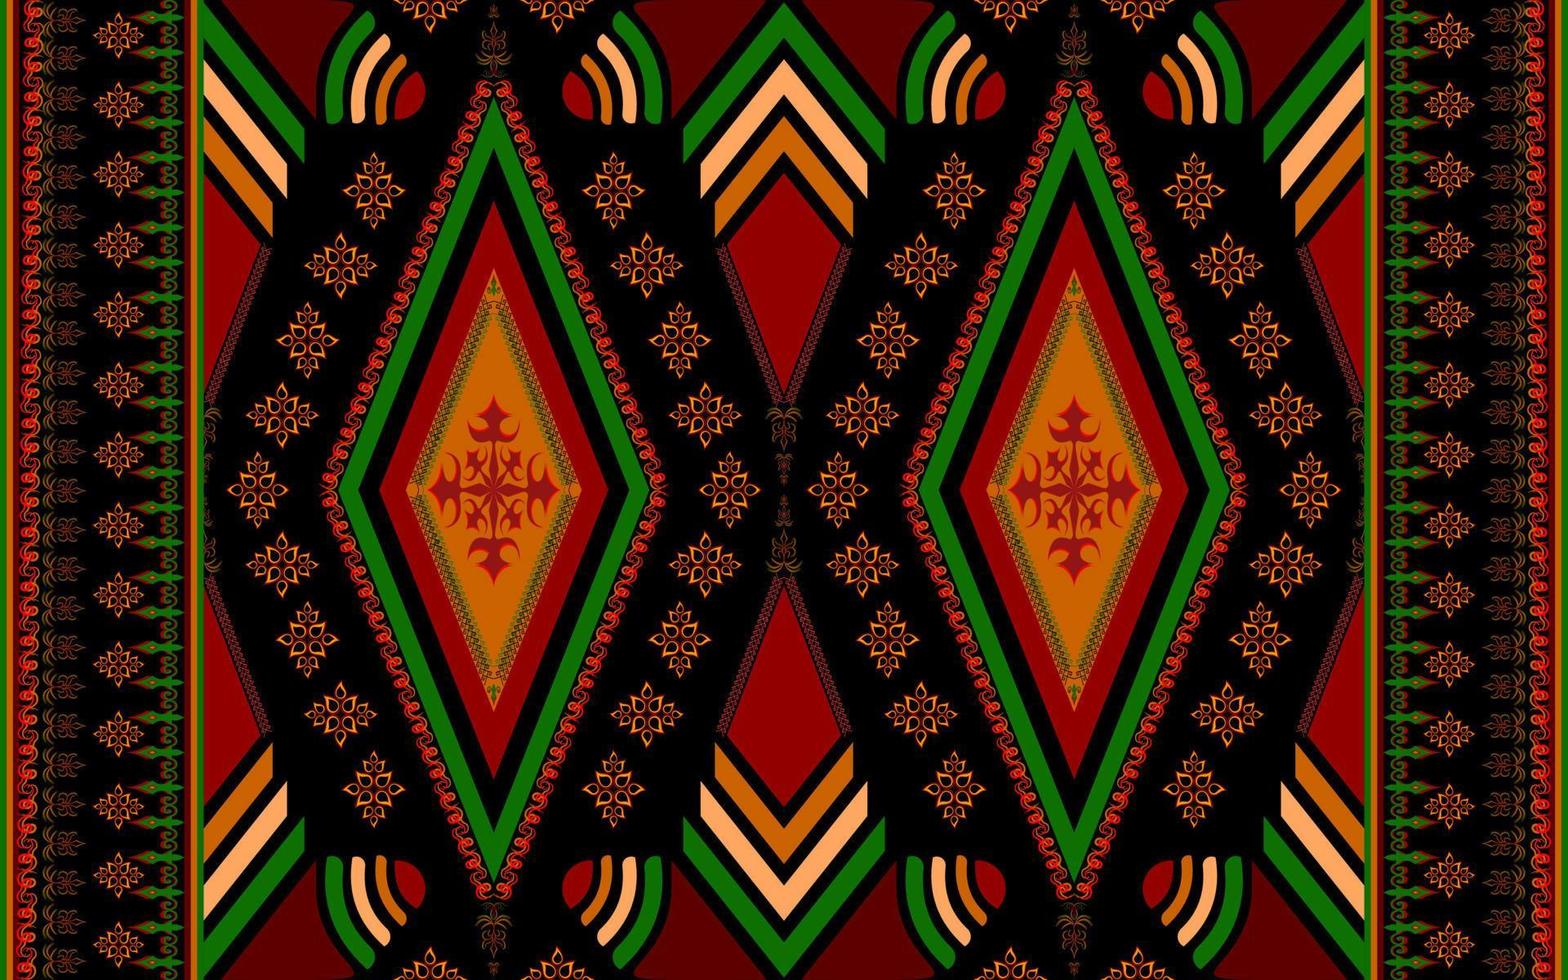 Ethnic folk geometric seamless pattern in regge style with red, green and yellow tone in vector illustration design for fabric, mat, carpet, scarf, wrapping paper, tile and more